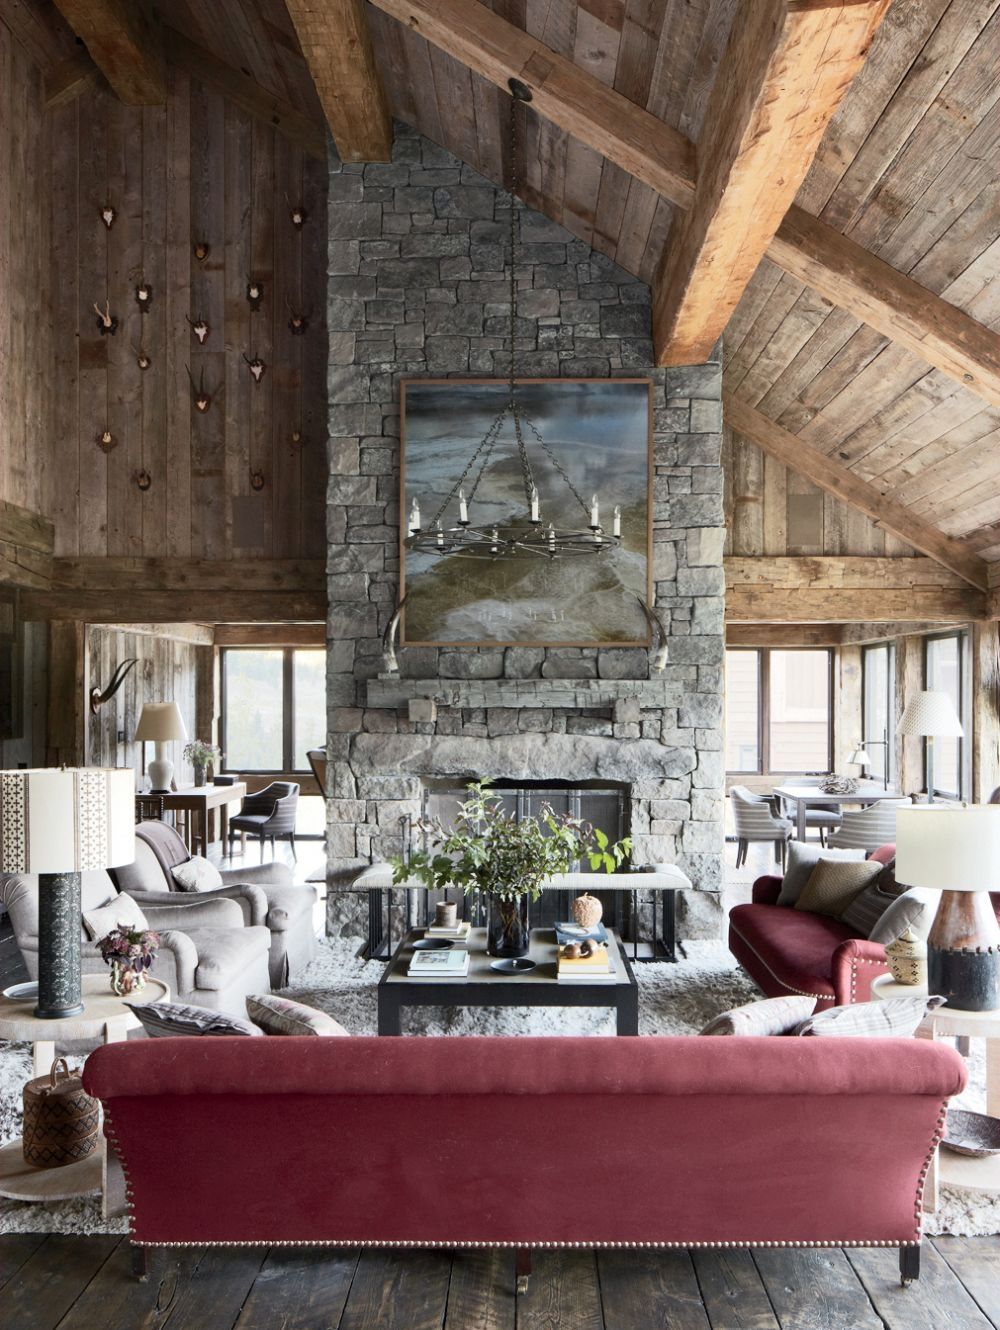 Red Sofa Fireplace Pretty Red Sofa Also Stone Fireplace And Exposed Wood Beam Feat Round Chandelier In Rustic Living Room  Living Room Rustic Living Room Appears Fantastic Performance